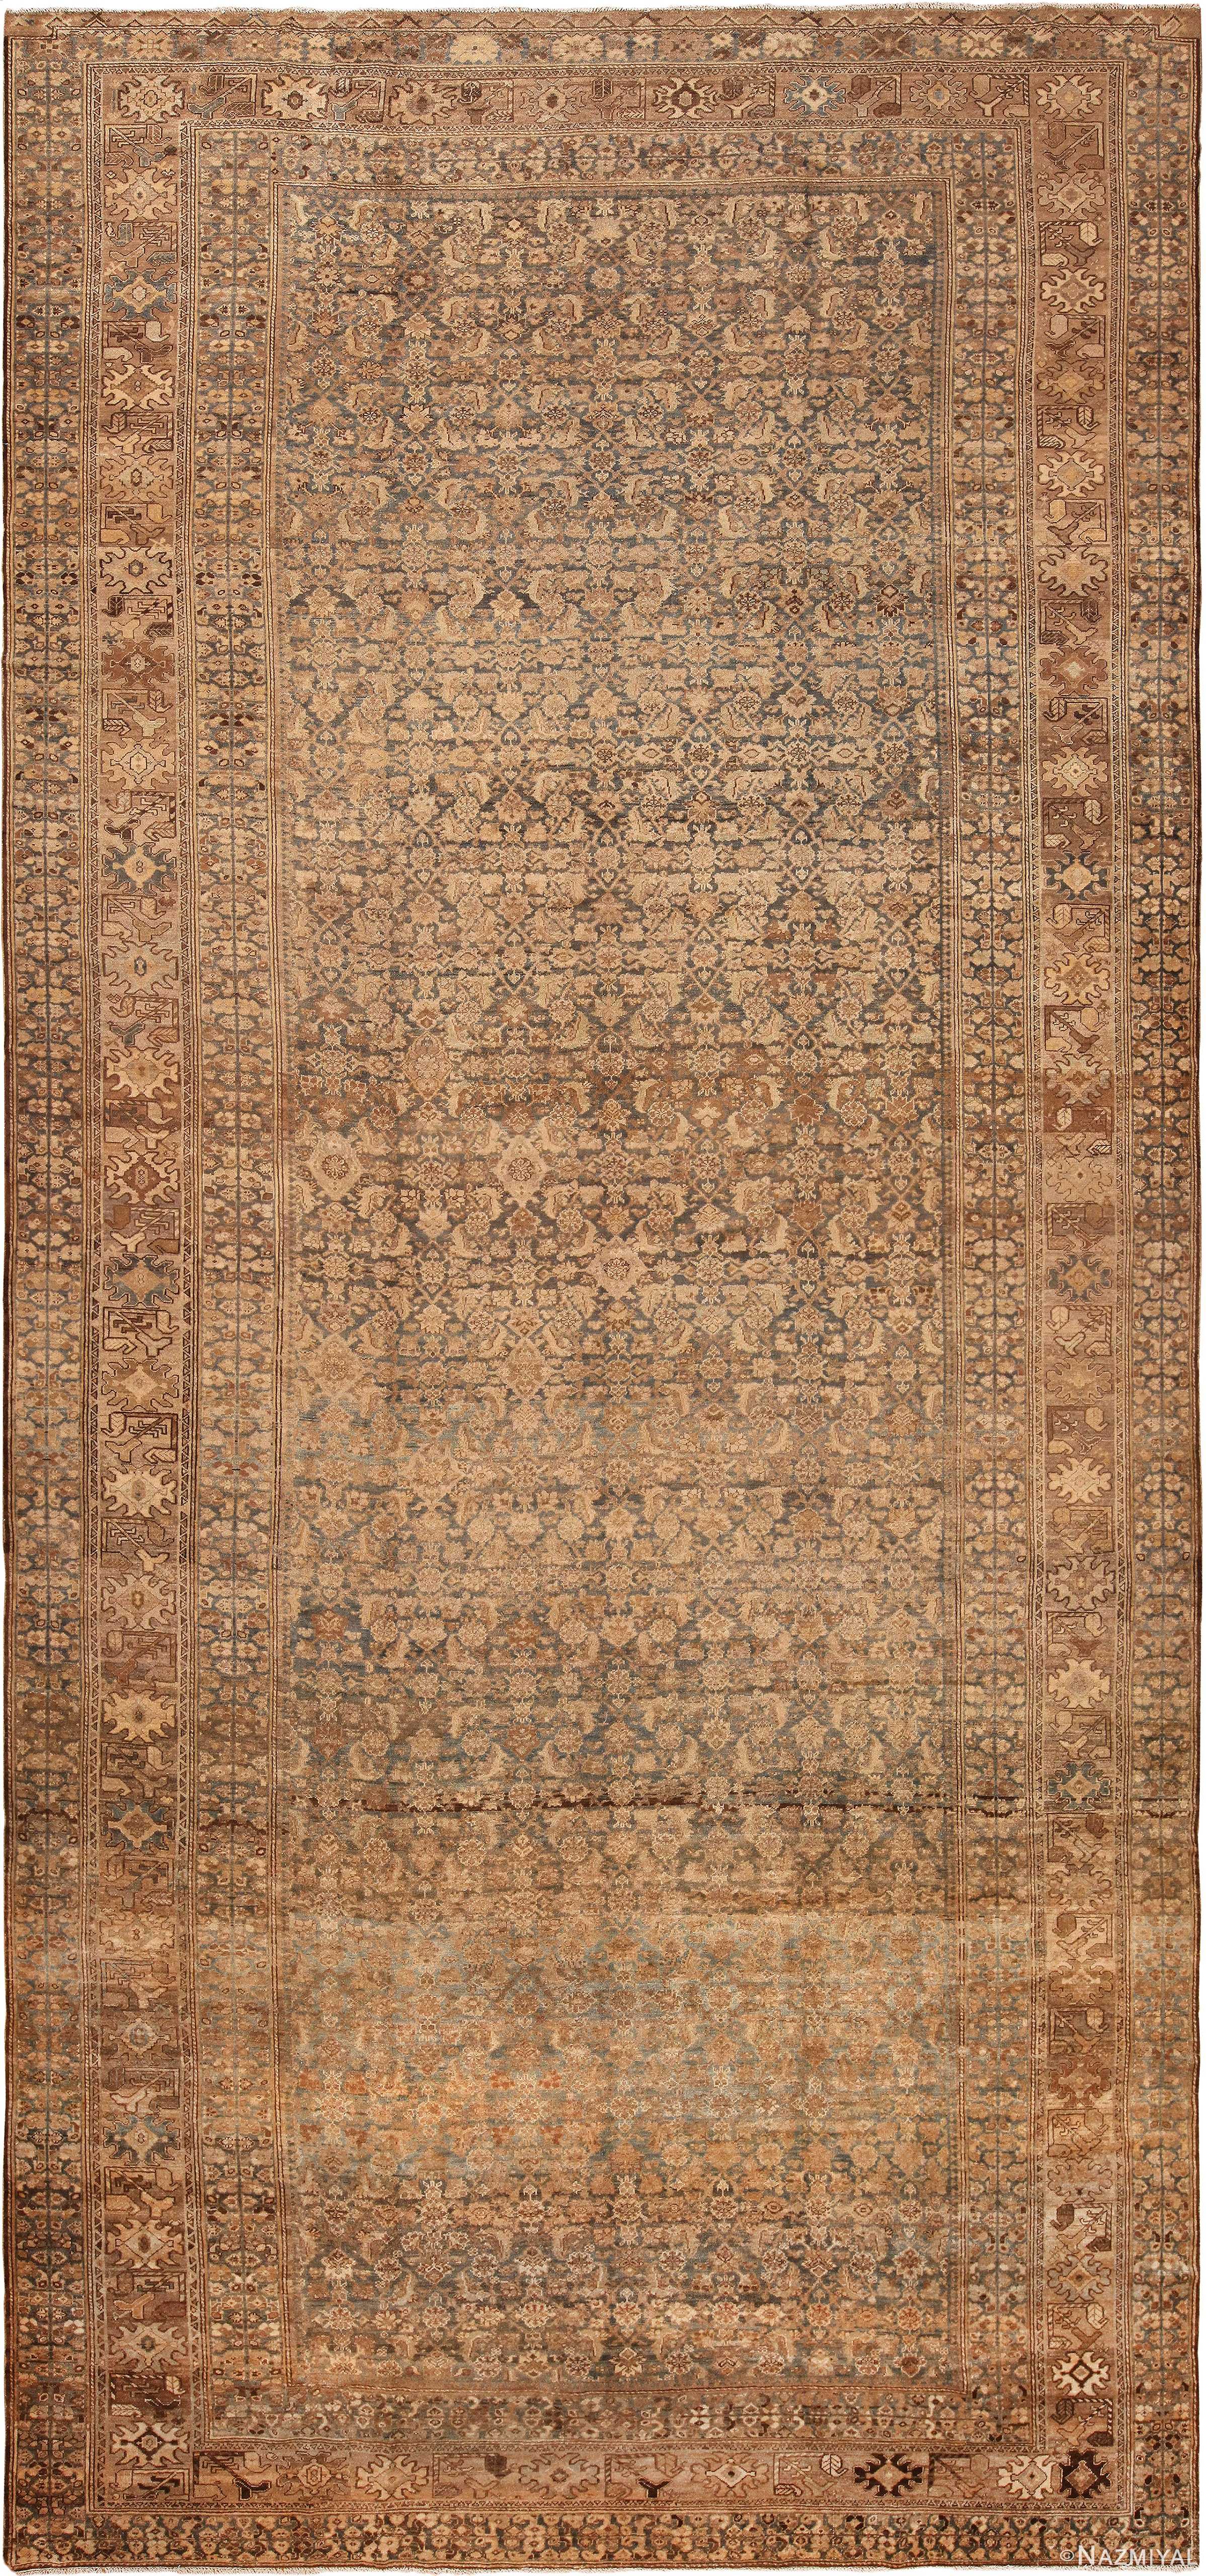 Oversized Antique Persian Malayer Rug 71334 by Nazmiyal Antique Rugs